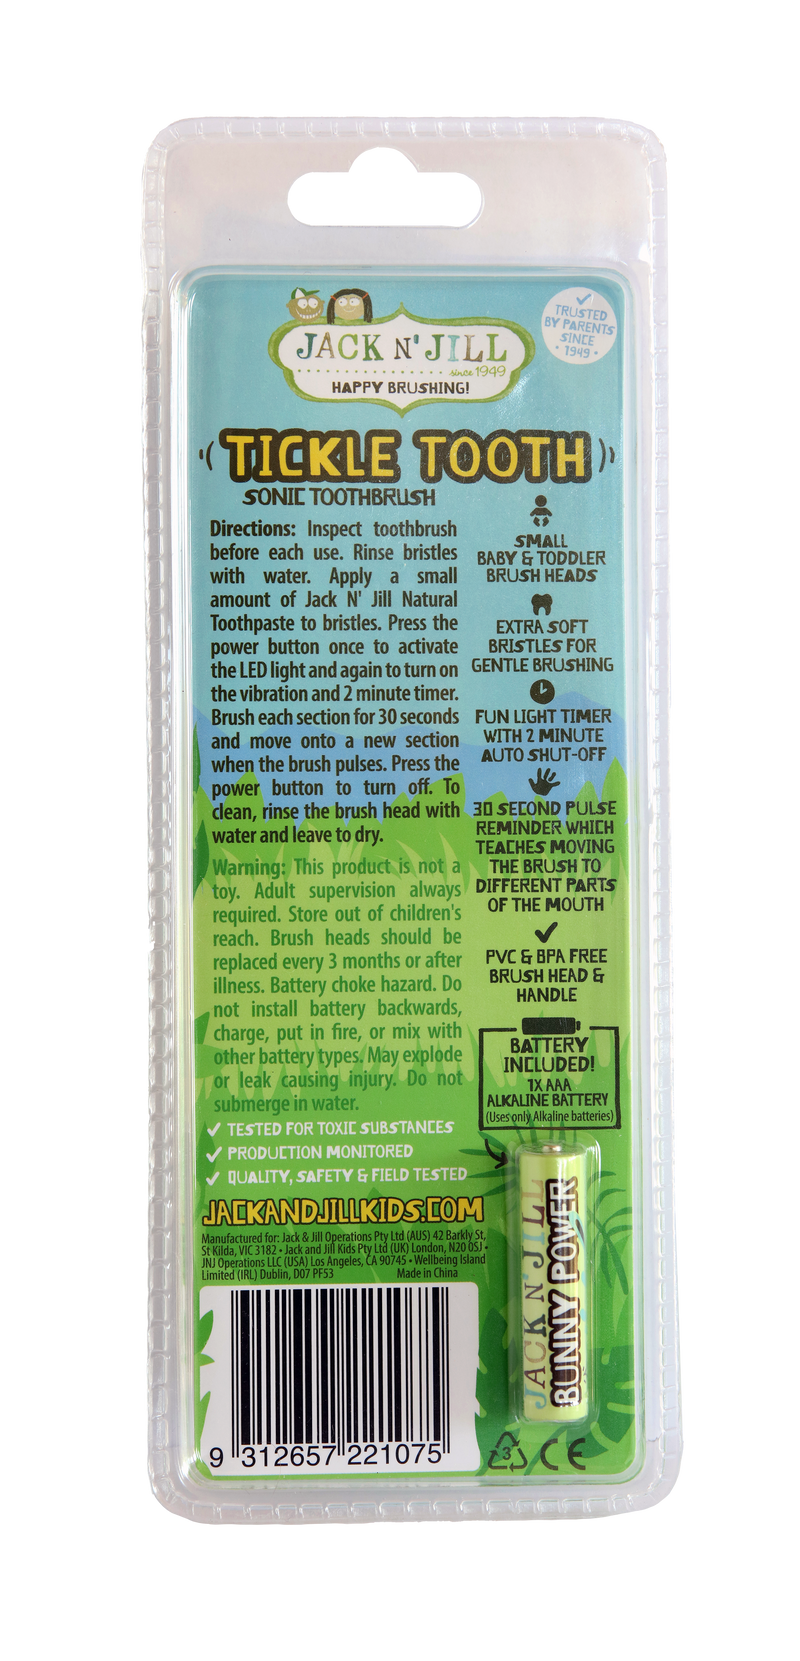 Tickle Tooth Sonic Toothbrush